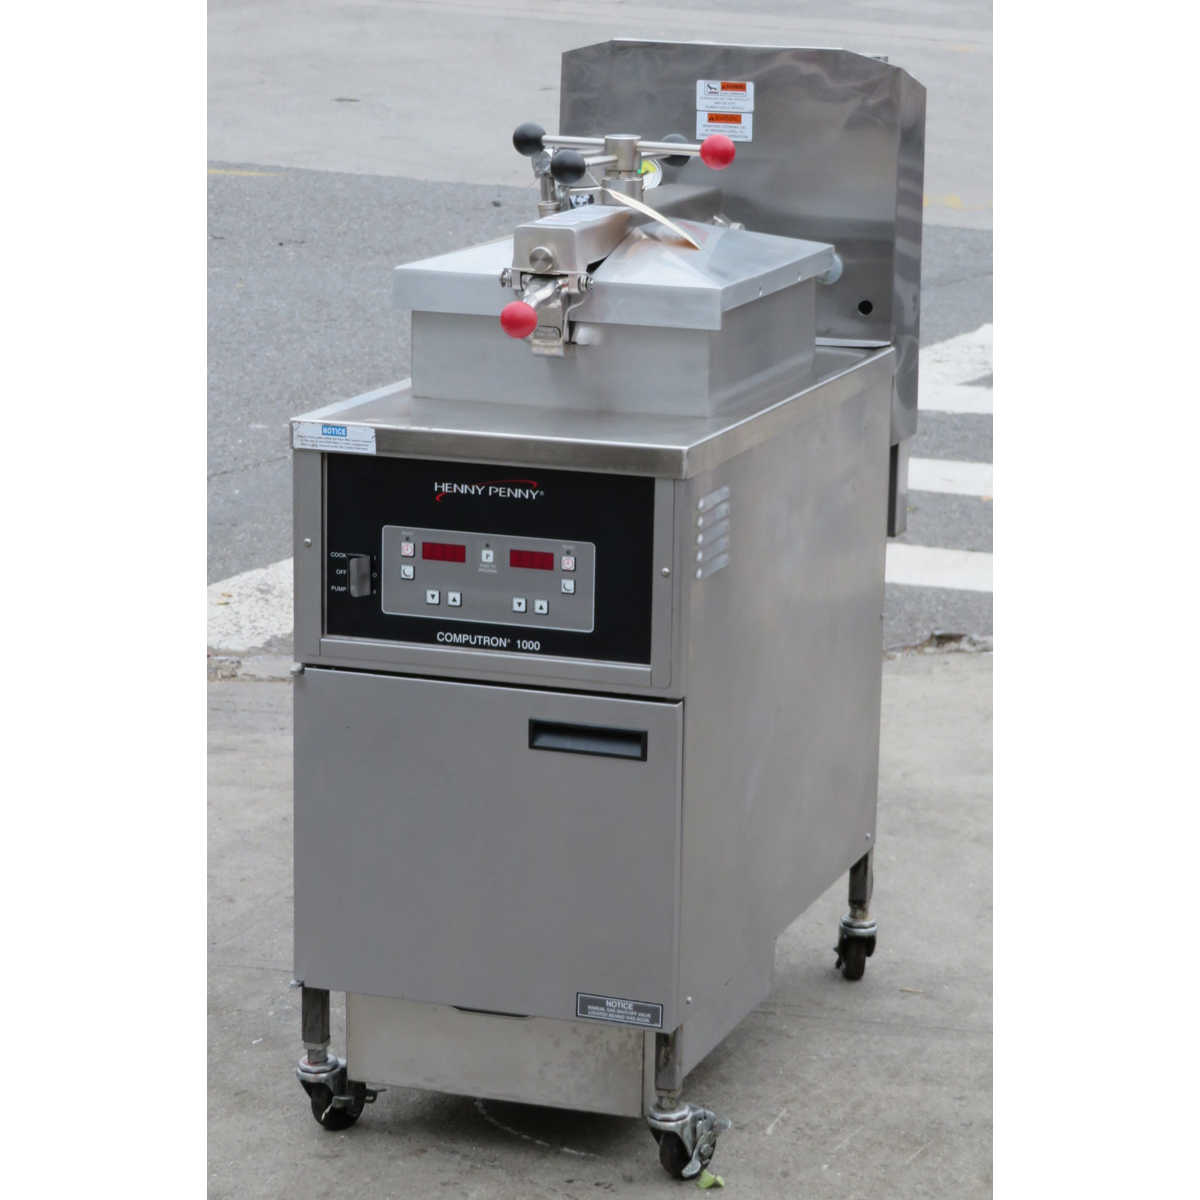 Henny Penny 600 Computron 1000 Natural Gas Pressure Fryer 120V Pressure Fryer, Used Great Condition